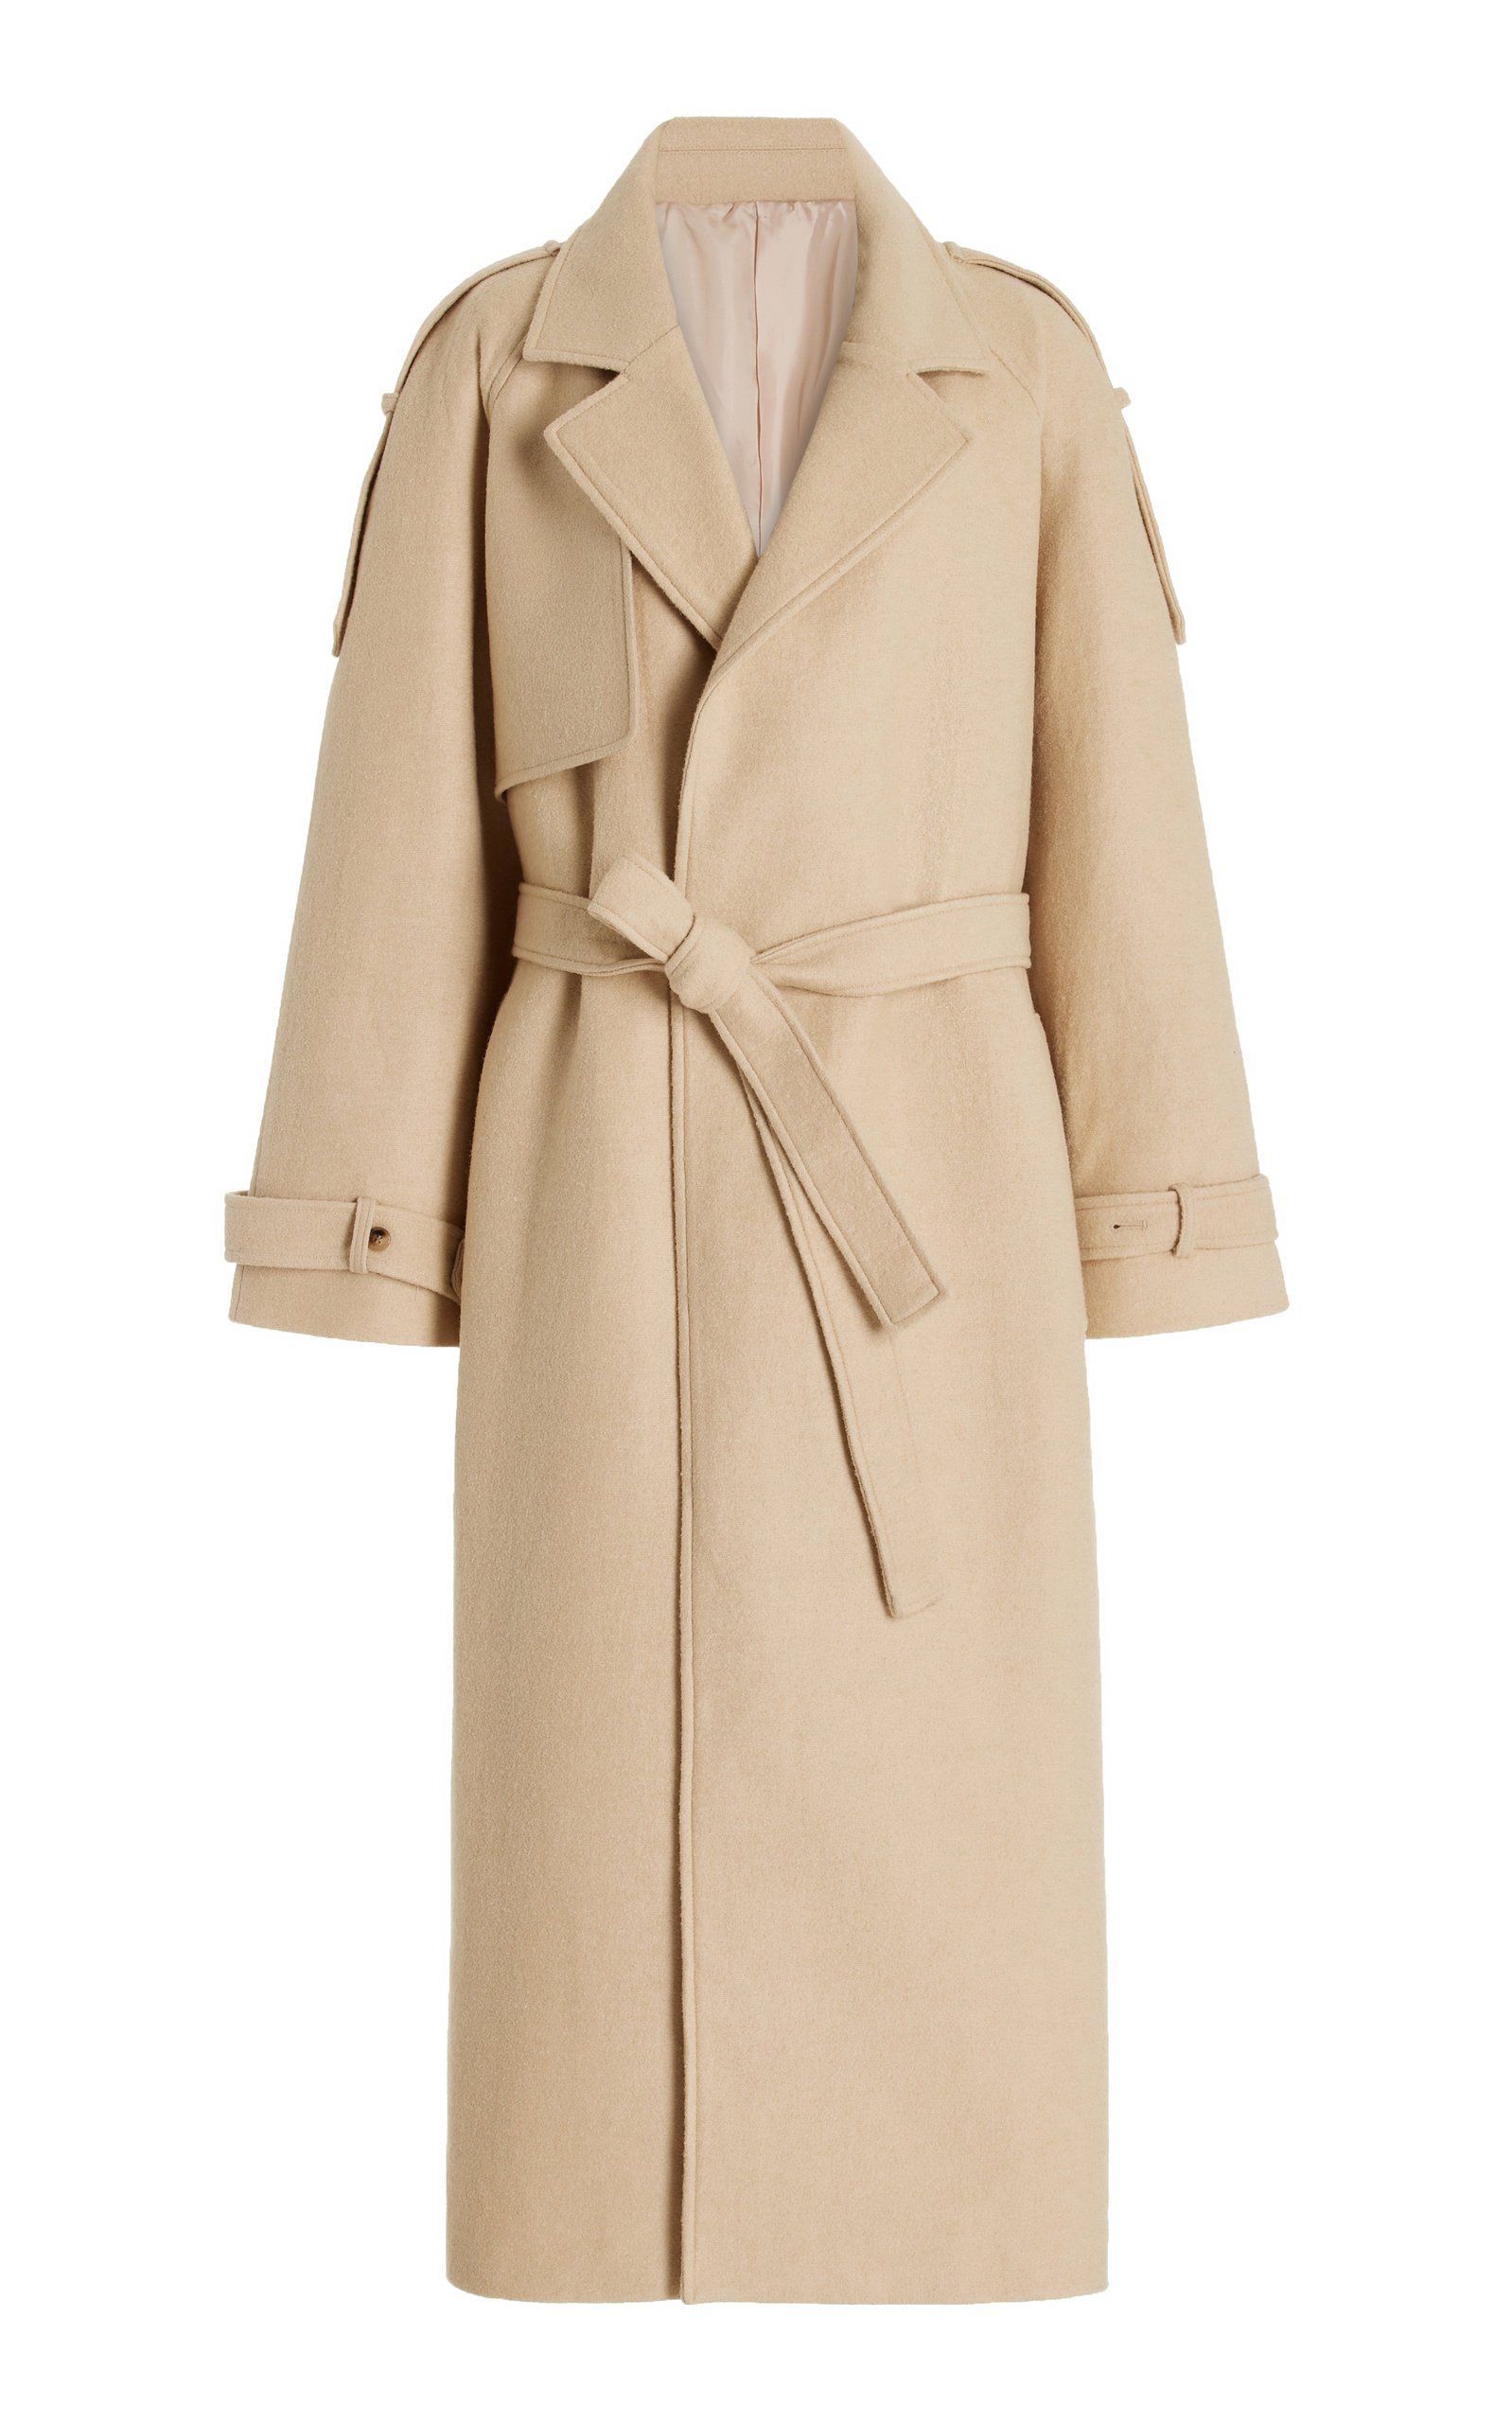 Suzanne Boiled Wool-Blend Trench Coat